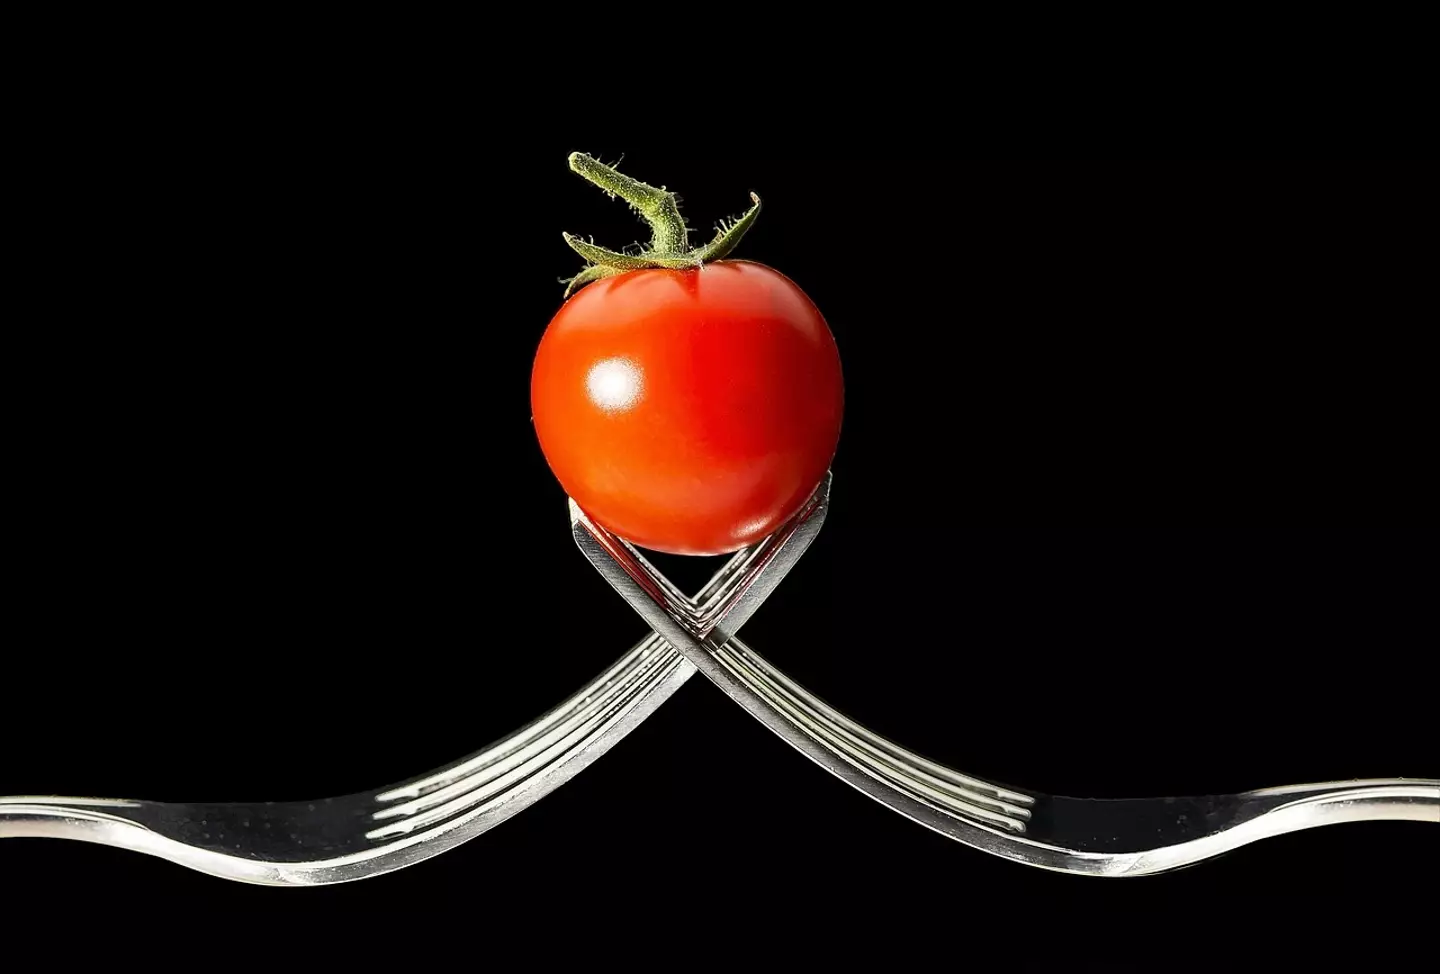 A tomato was grown in space.